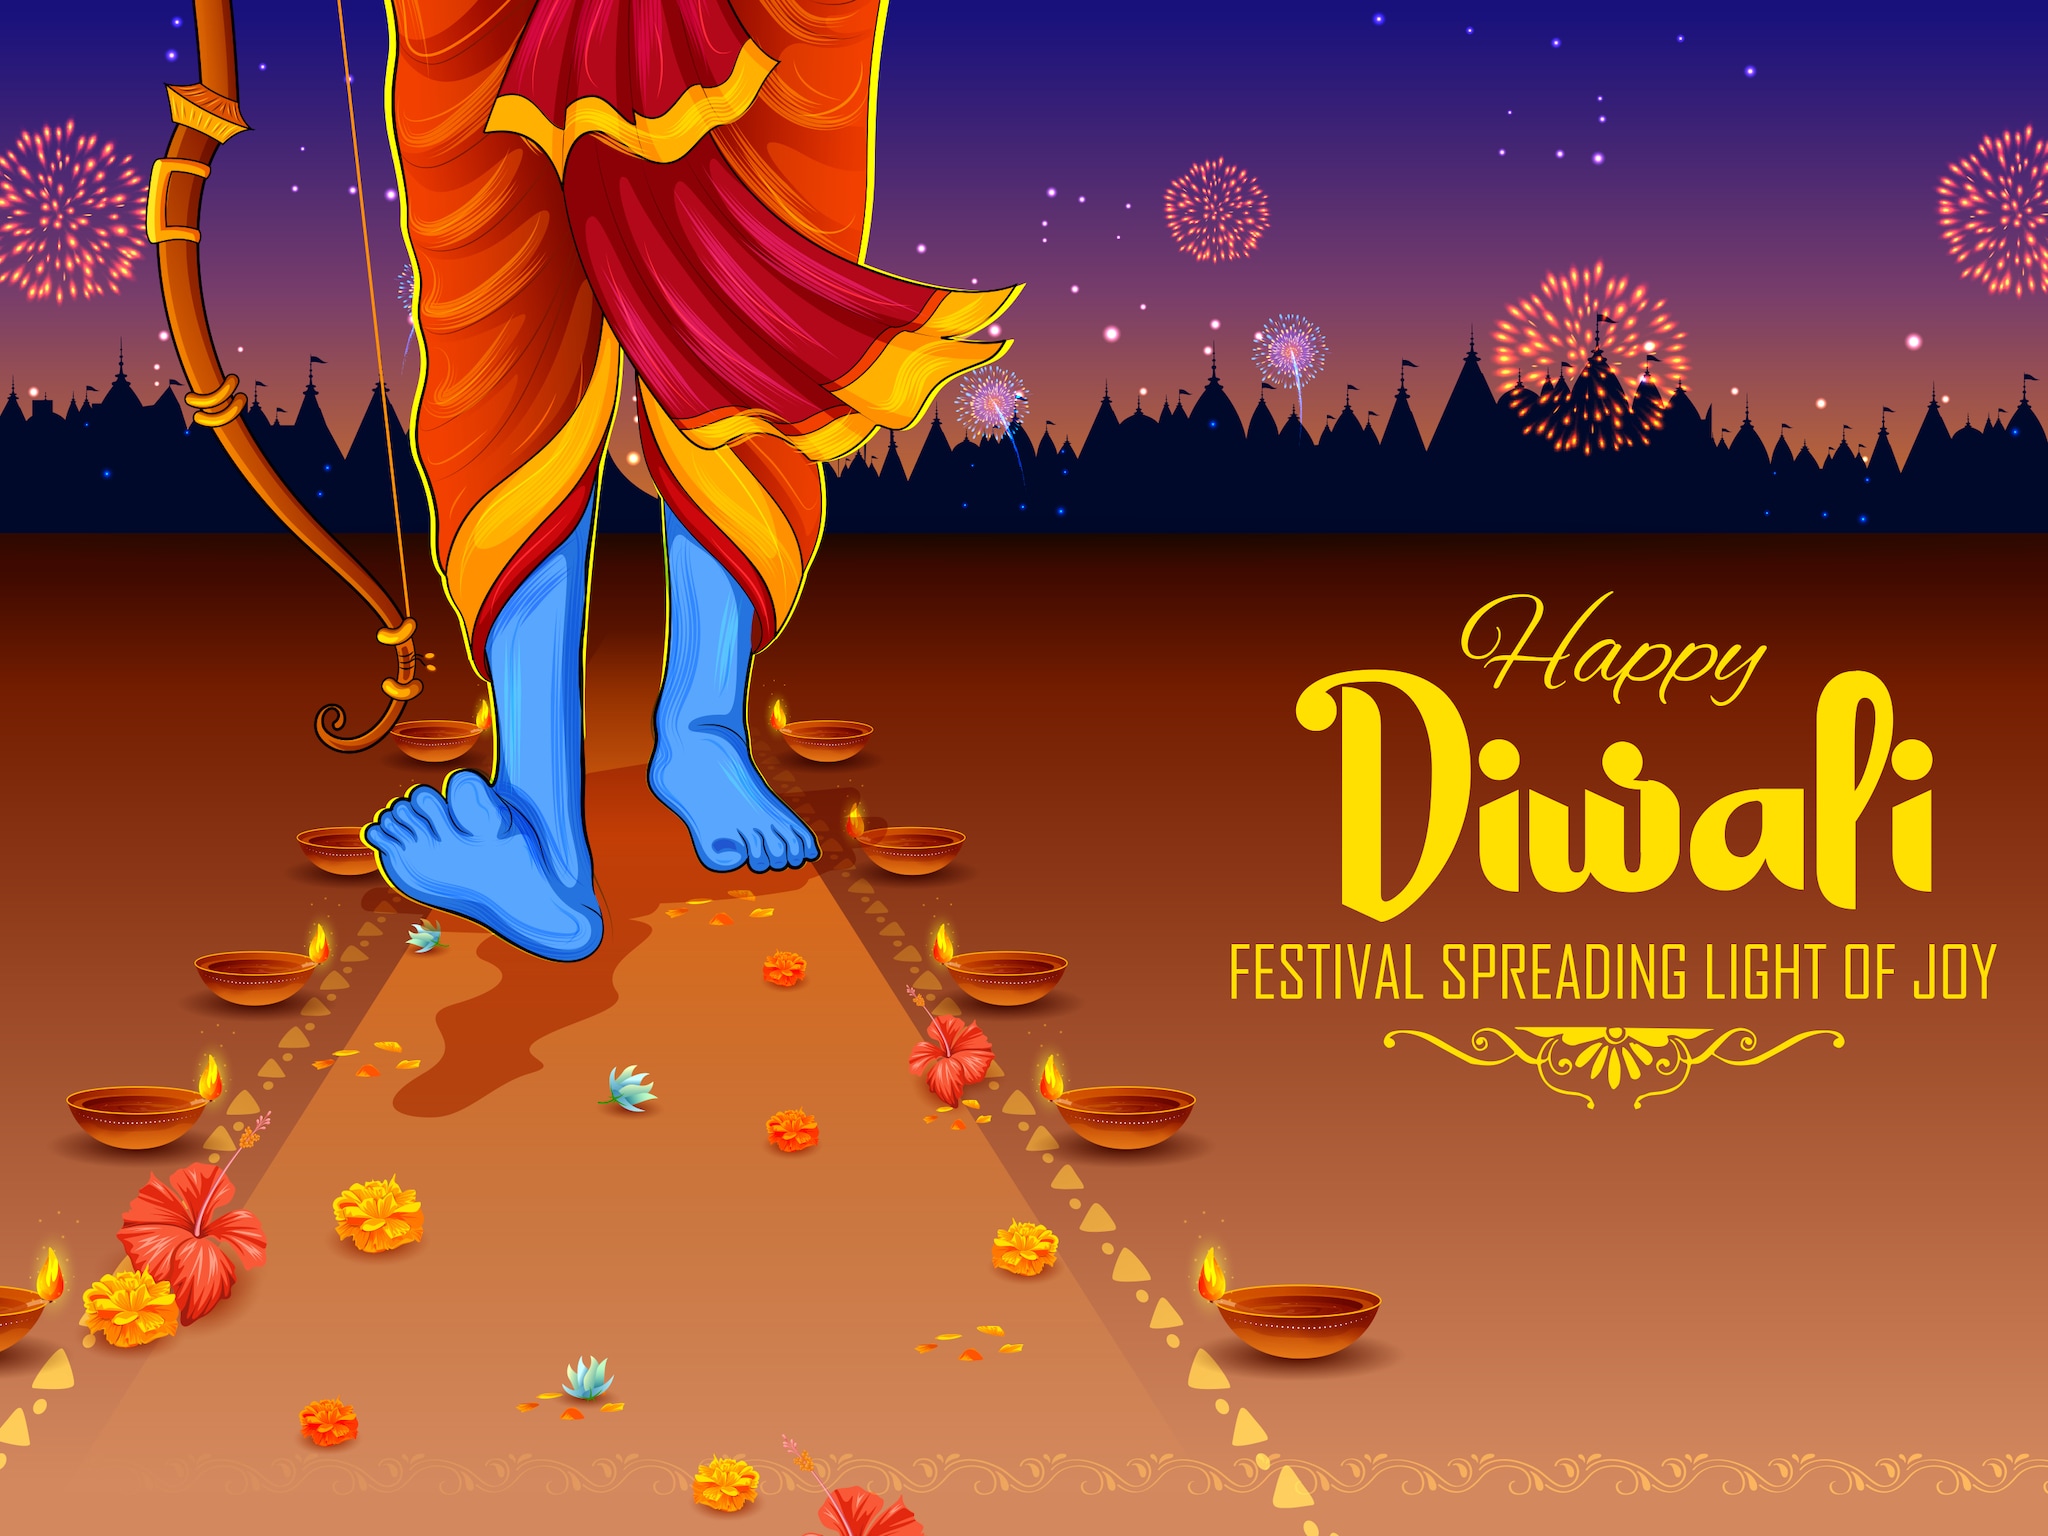 Happy Diwali 2022: Wishes Images, Wallpaper, Quotes, Status, Photos, Pics, SMS and Messages to share. (Image: Shutterstock) 